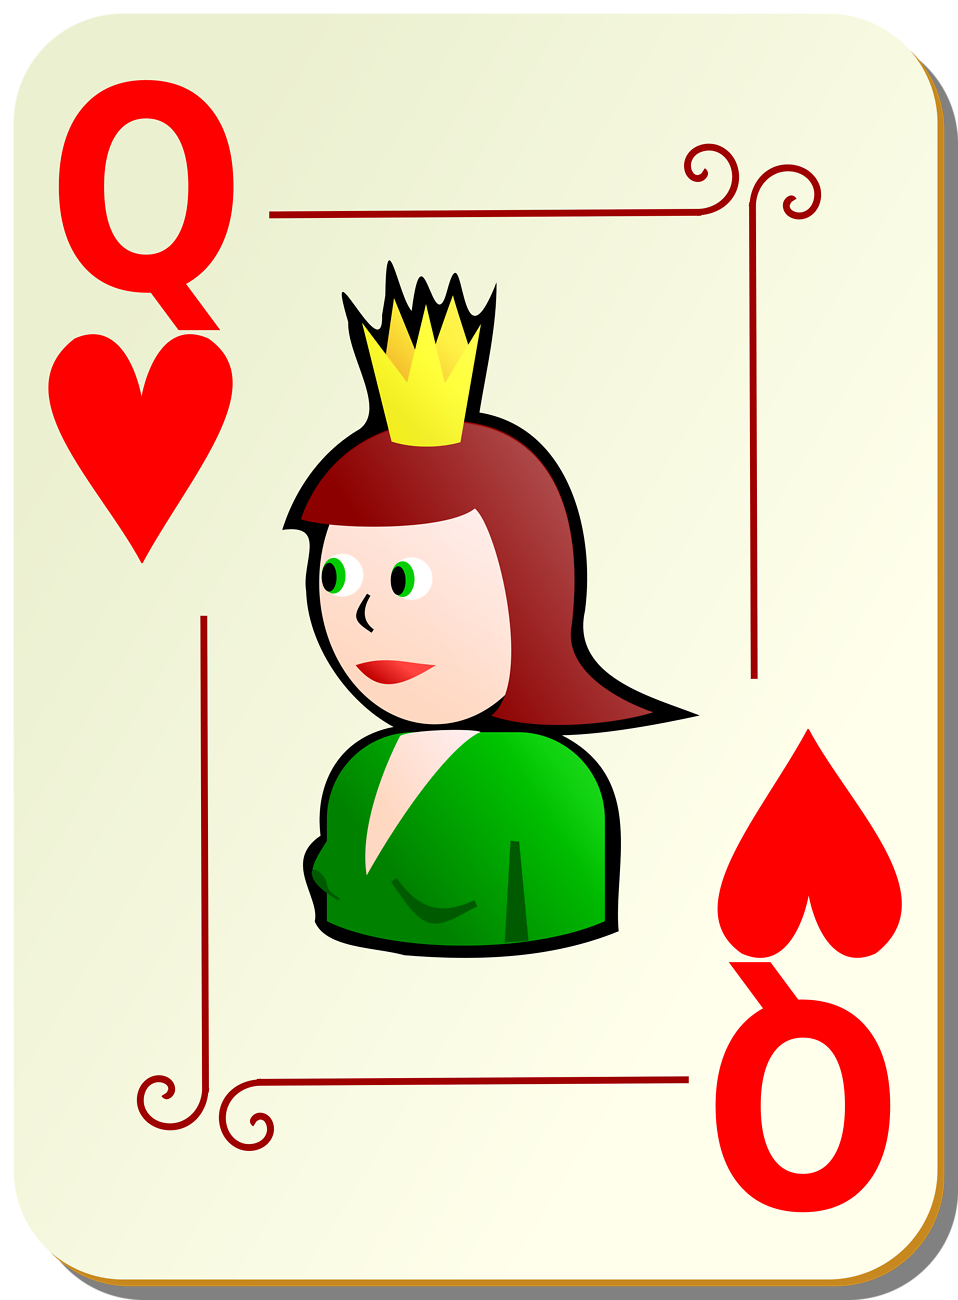 Playing Cards | Free Stock Photo | Illustration of a Queen of ...